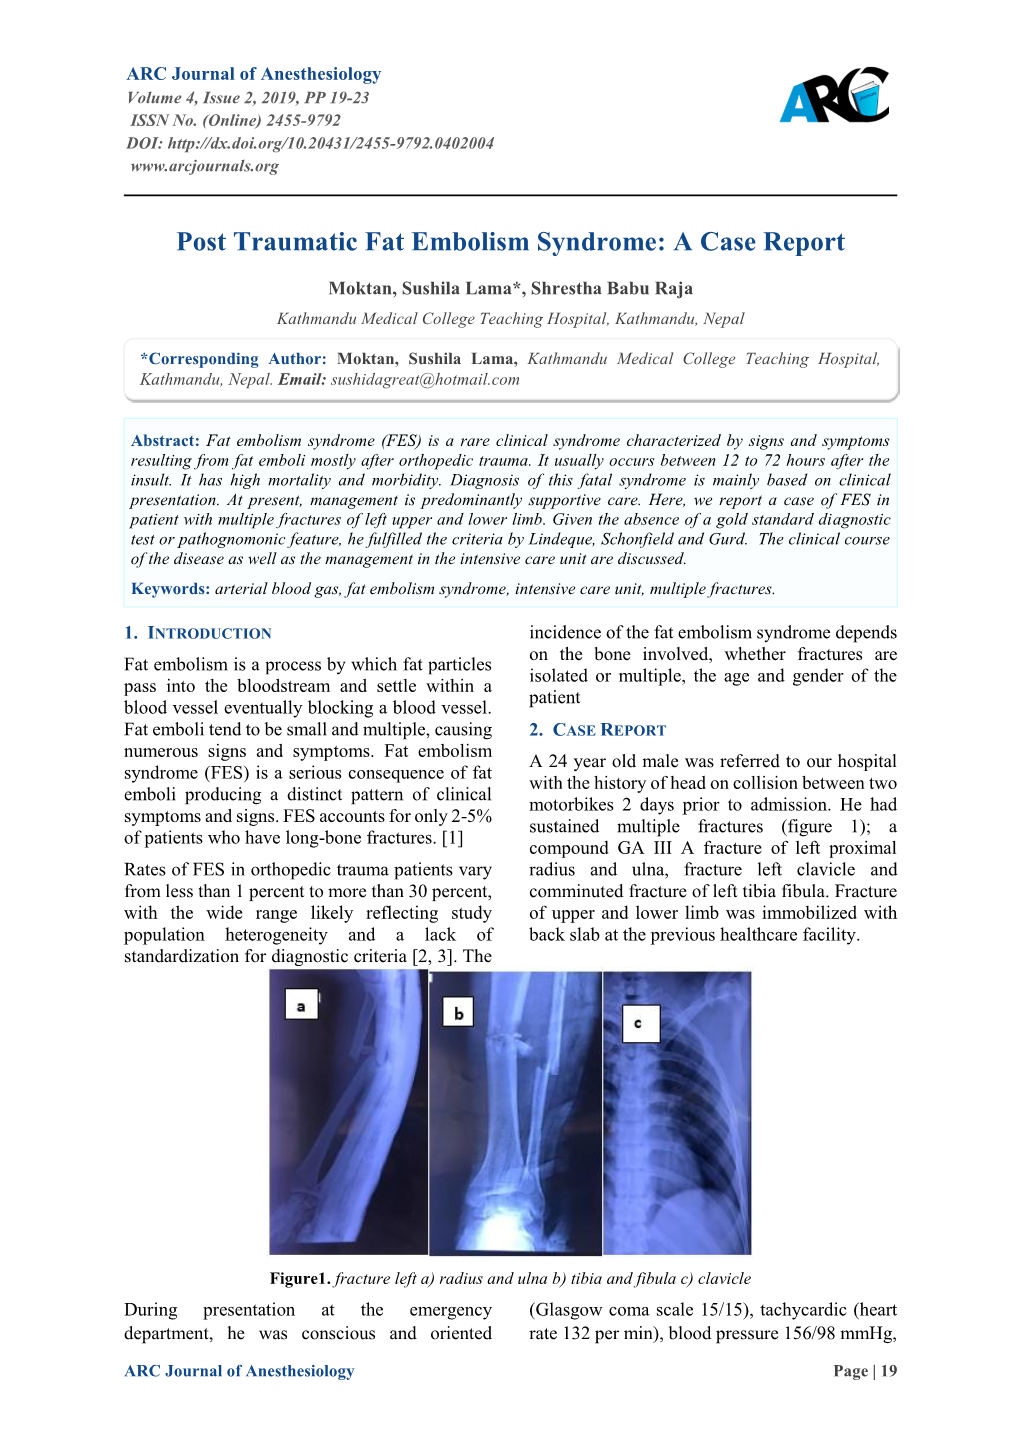 Post Traumatic Fat Embolism Syndrome: a Case Report